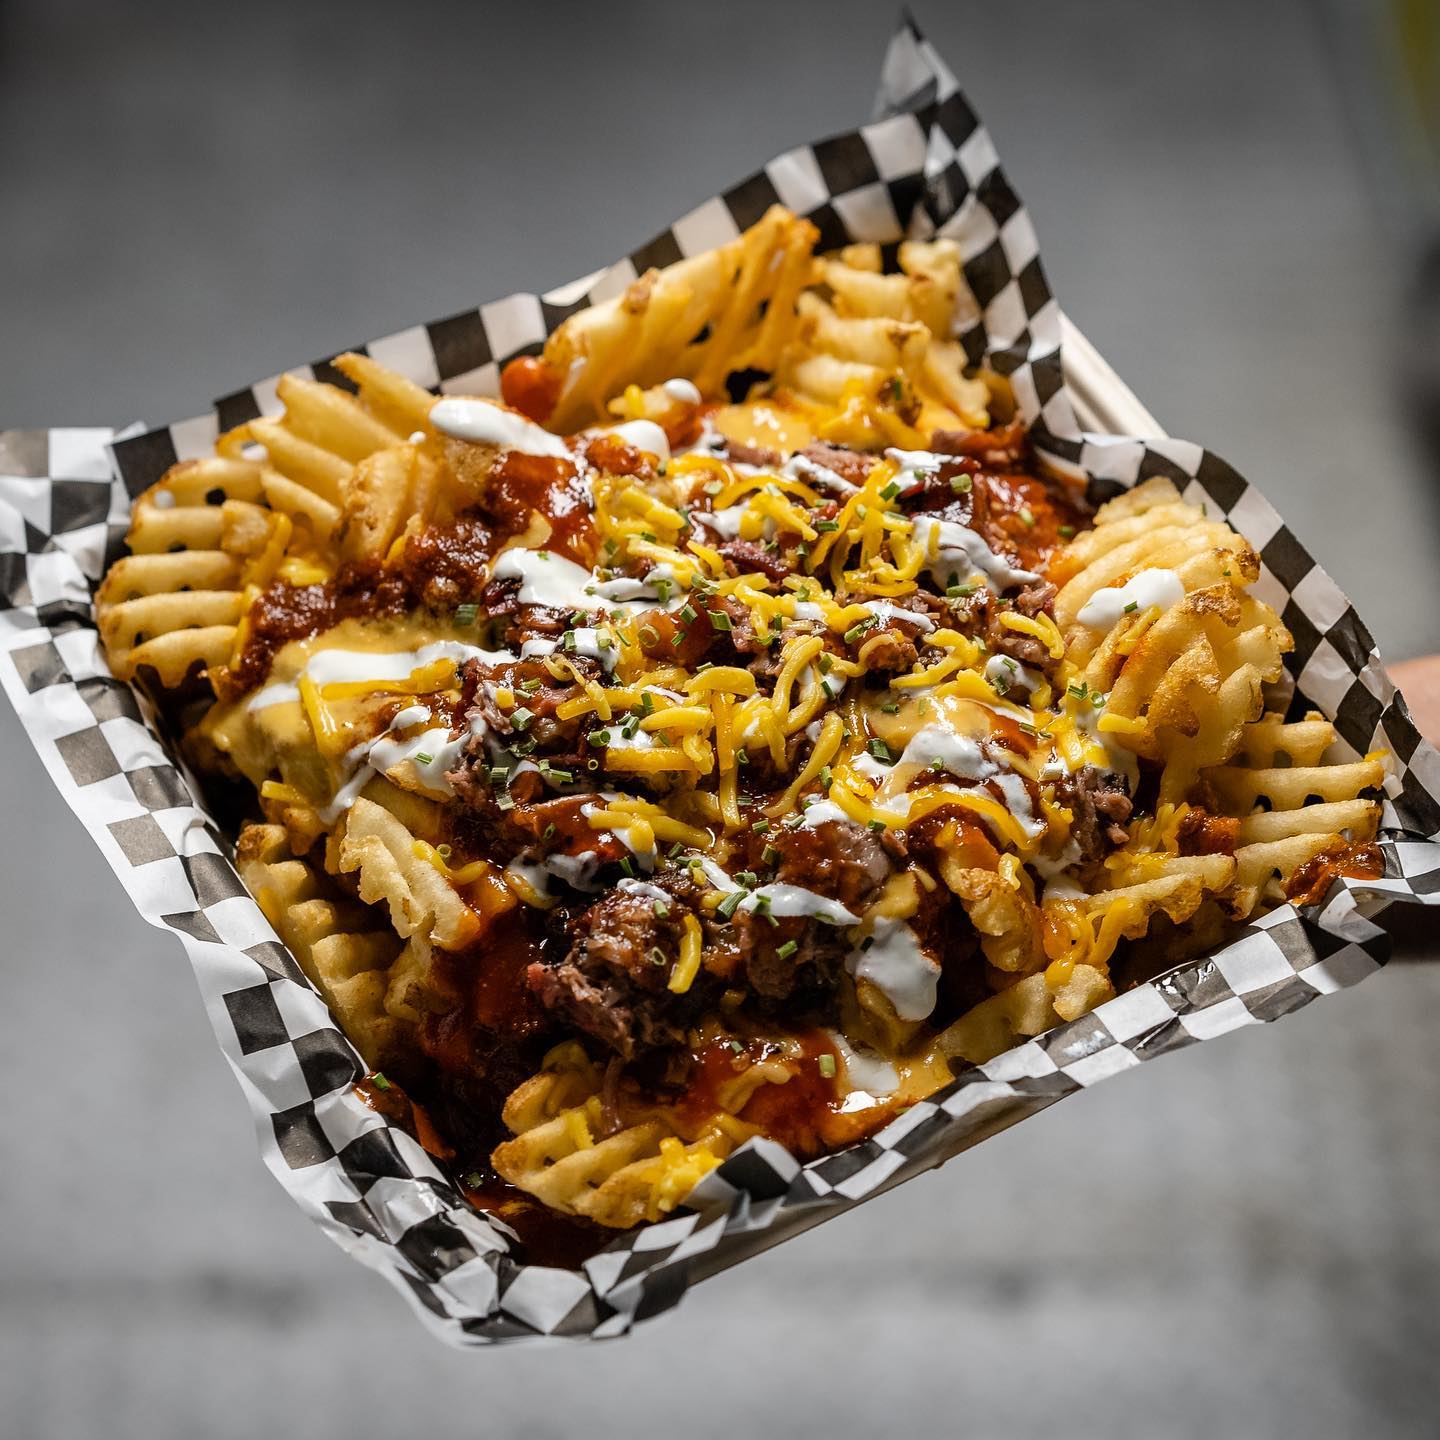 A serving of cheese waffle fries with sauces and brisket tossed in.